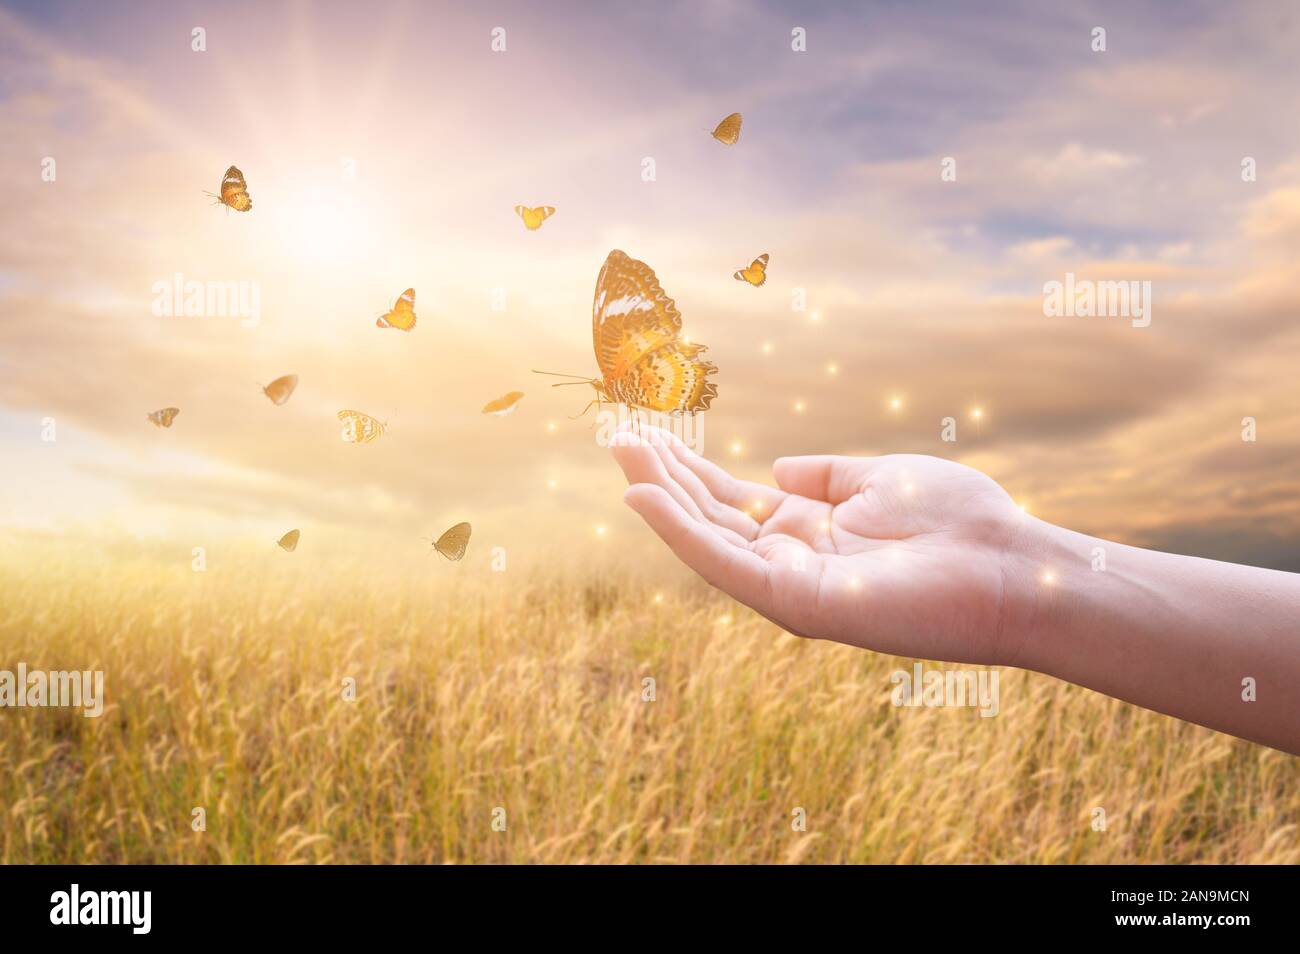 The girl frees the butterfly from the jar, golden blue moment Concept of freedom Stock Photo